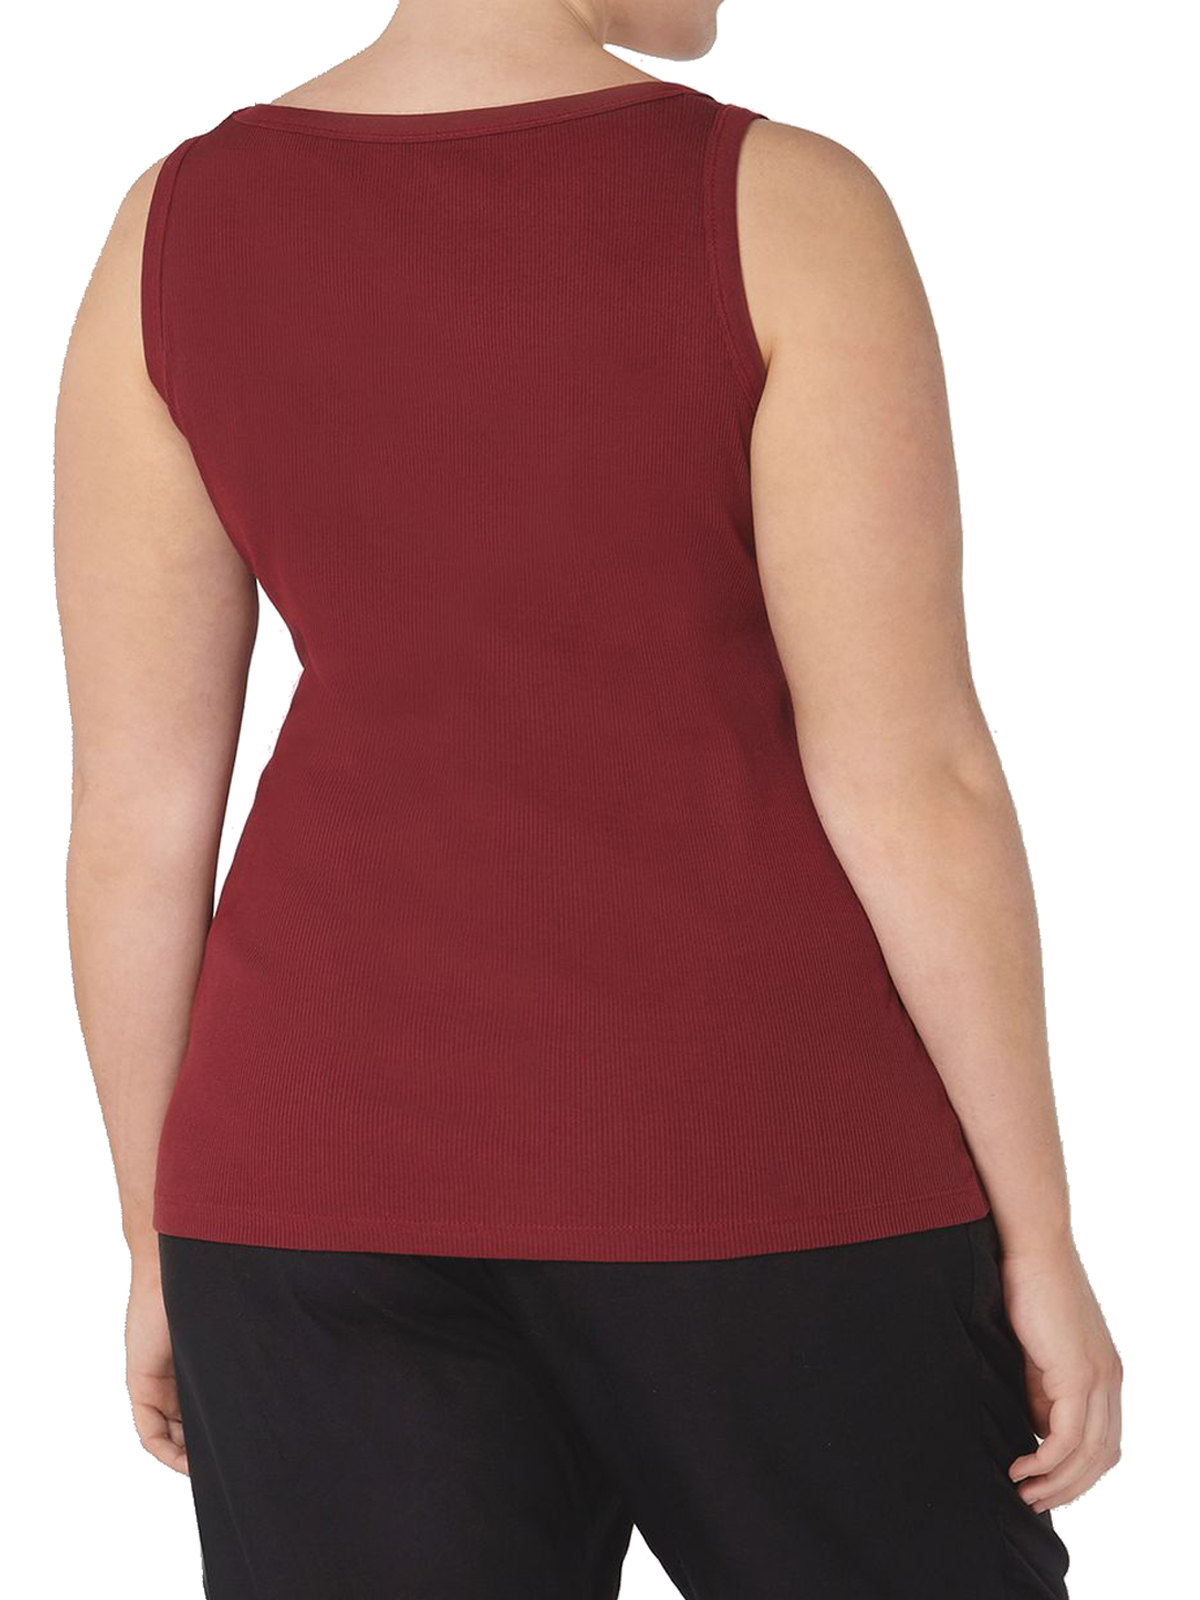 3vans BURGUNDY Pure Cotton Ribbed Sleeveless Vest - Plus Size 14 to 26/28